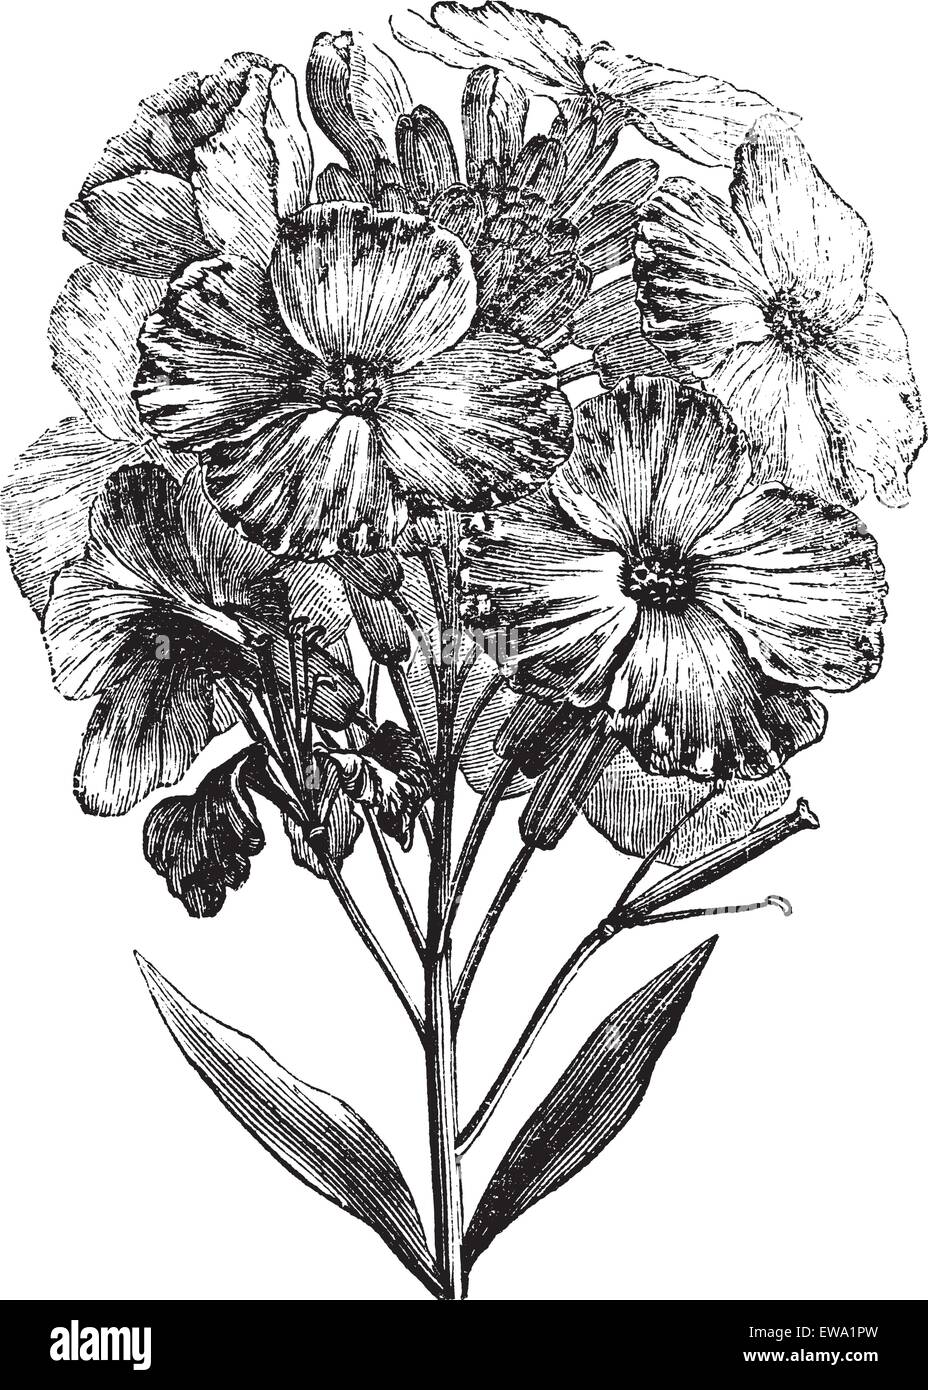 Aegean wallflower or Erysimum cheiri or Cheiranthus cheiri, vintage engraving. Old engraved illustration of Aegean wallflower, isolated on a white background. Stock Vector